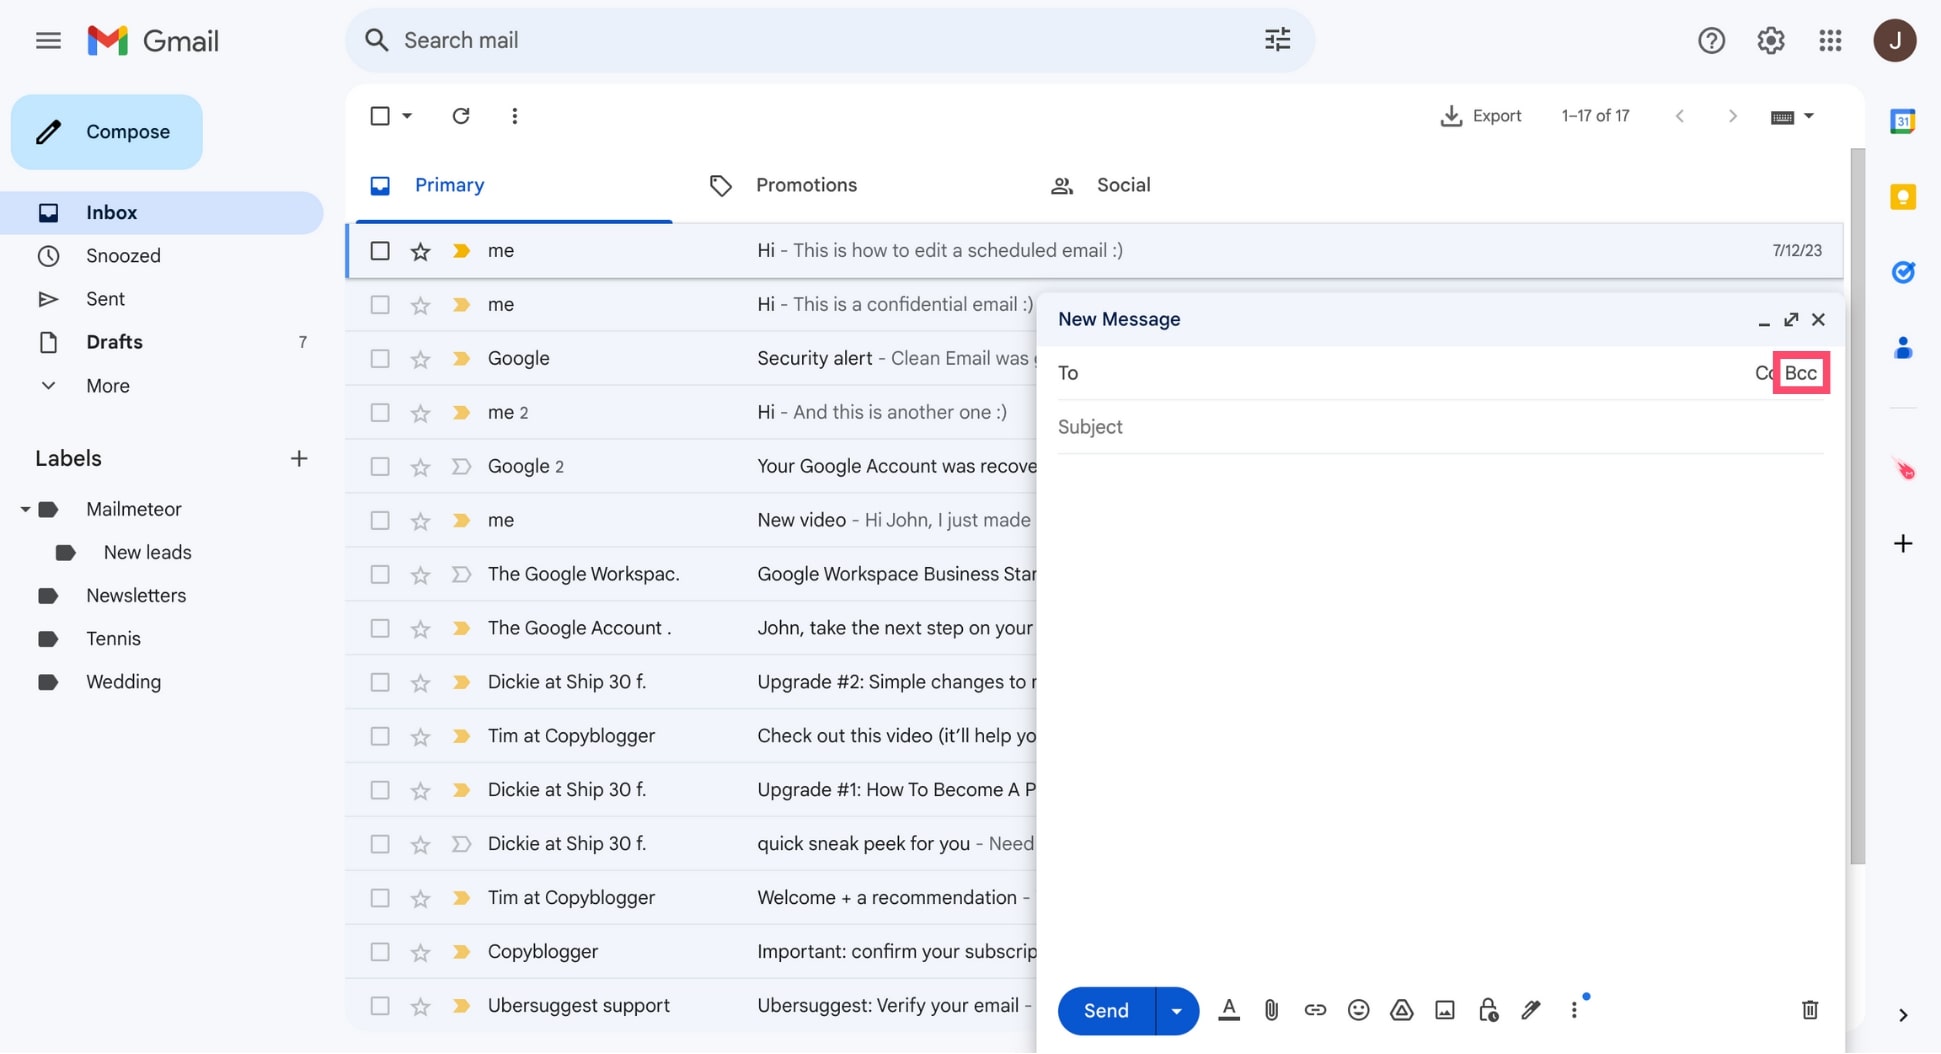 The BCC field in Gmail